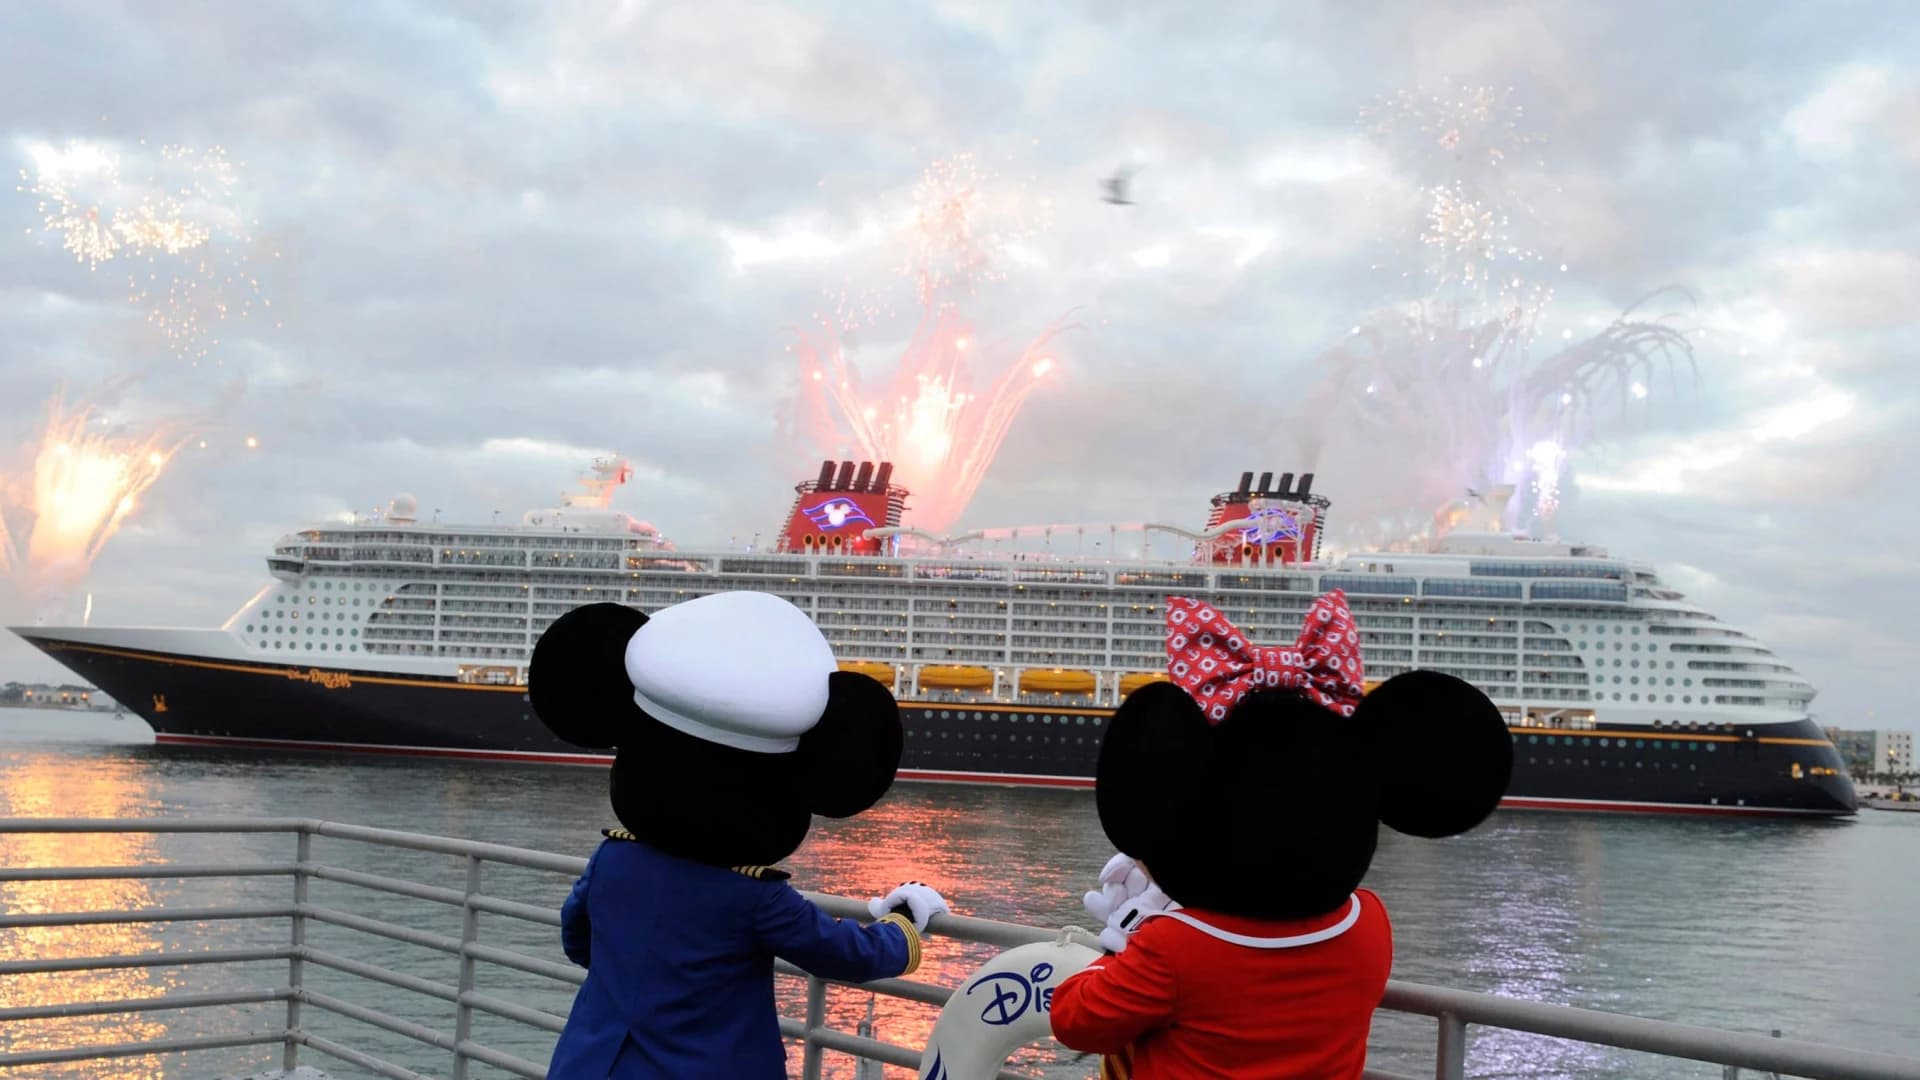 Disney cruise ships are getting 2nd island destination